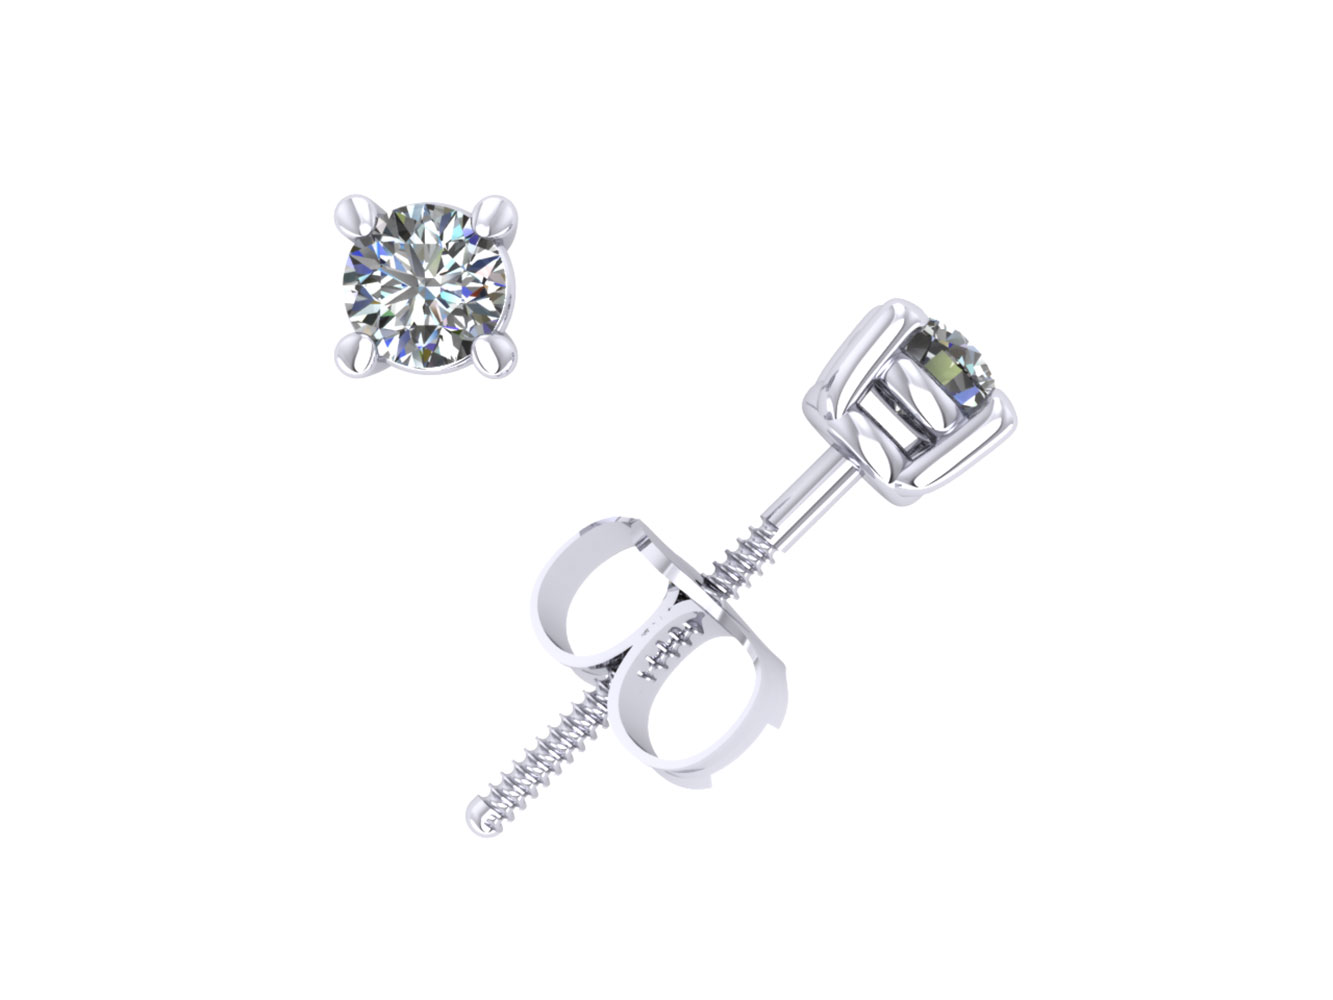 Jewel We Sell 0.15Ct Round Diamond Basket Solitaire Stud Earrings 14k White or Yellow Gold Prong H SI2